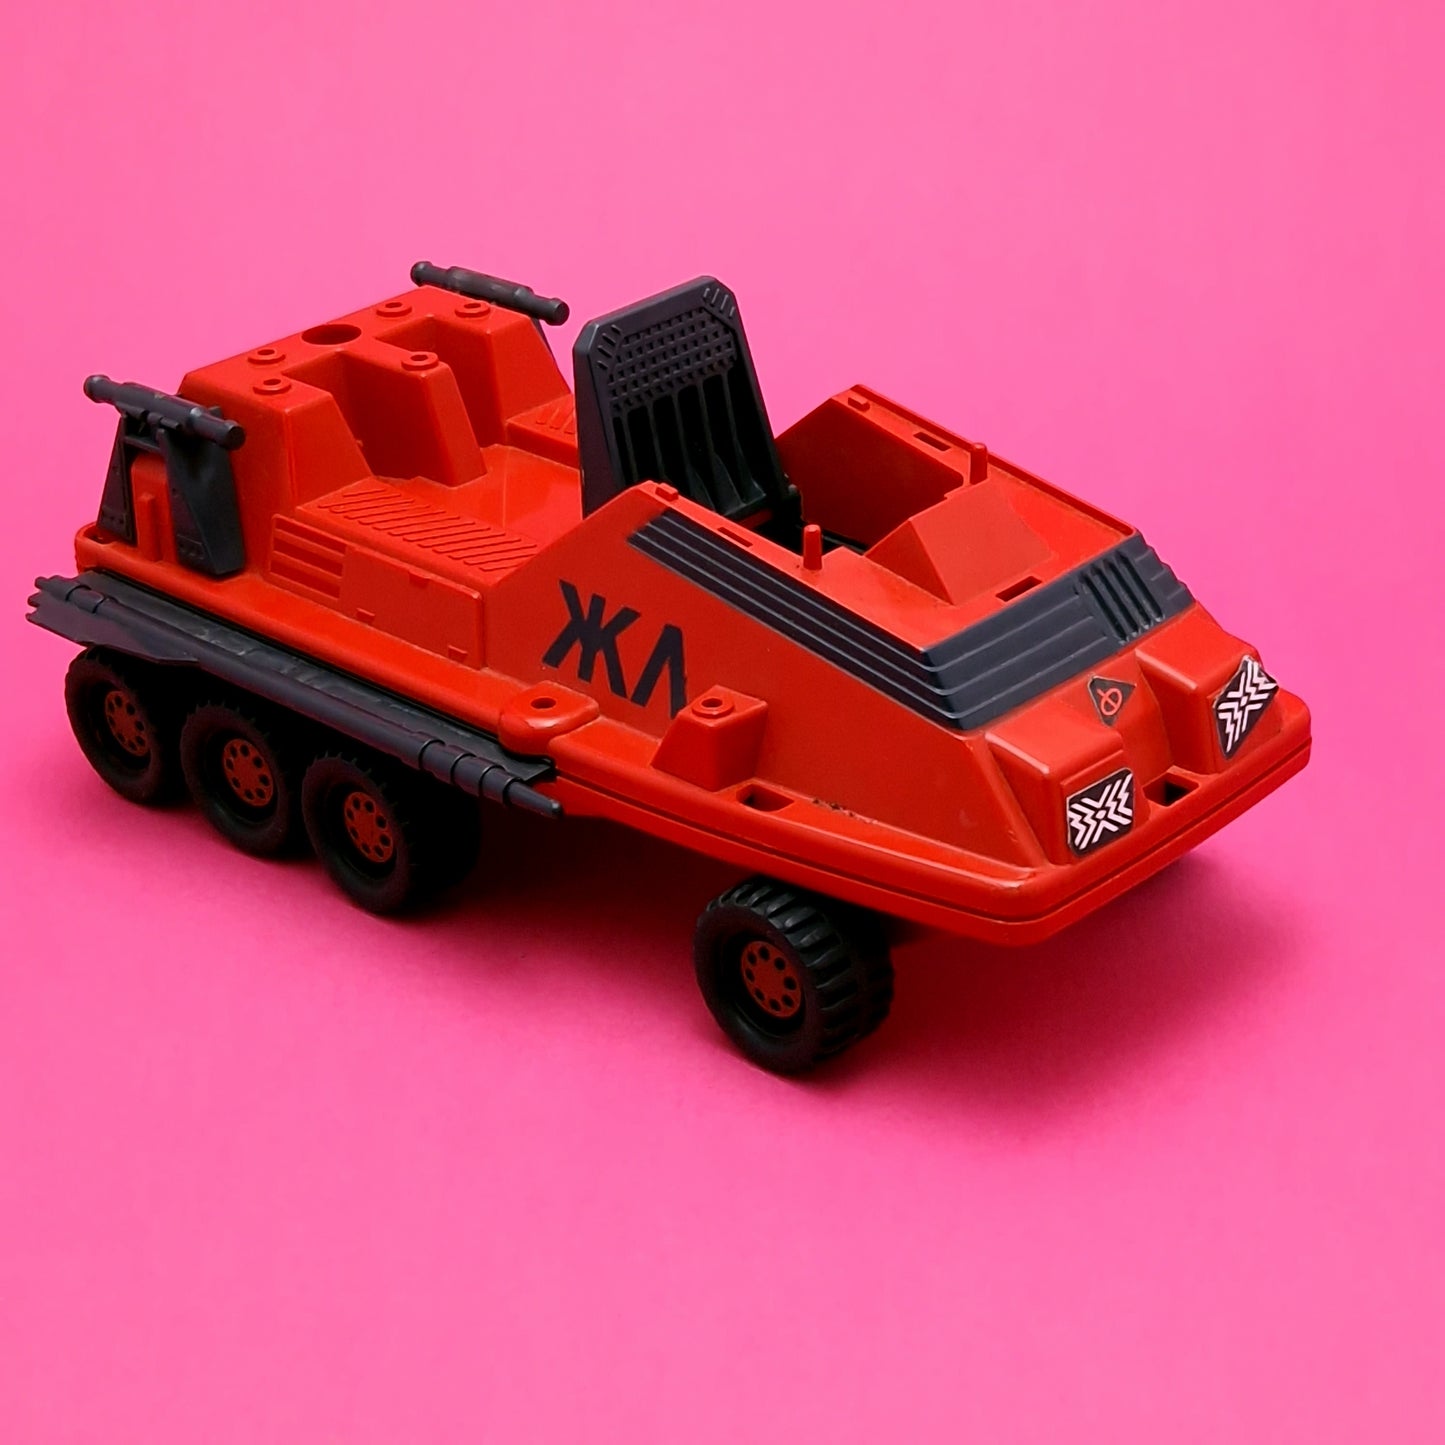 ACTION FORCE ☆ SHADOWTRAK VEHICLE for Figure ☆ Vintage Palitoy